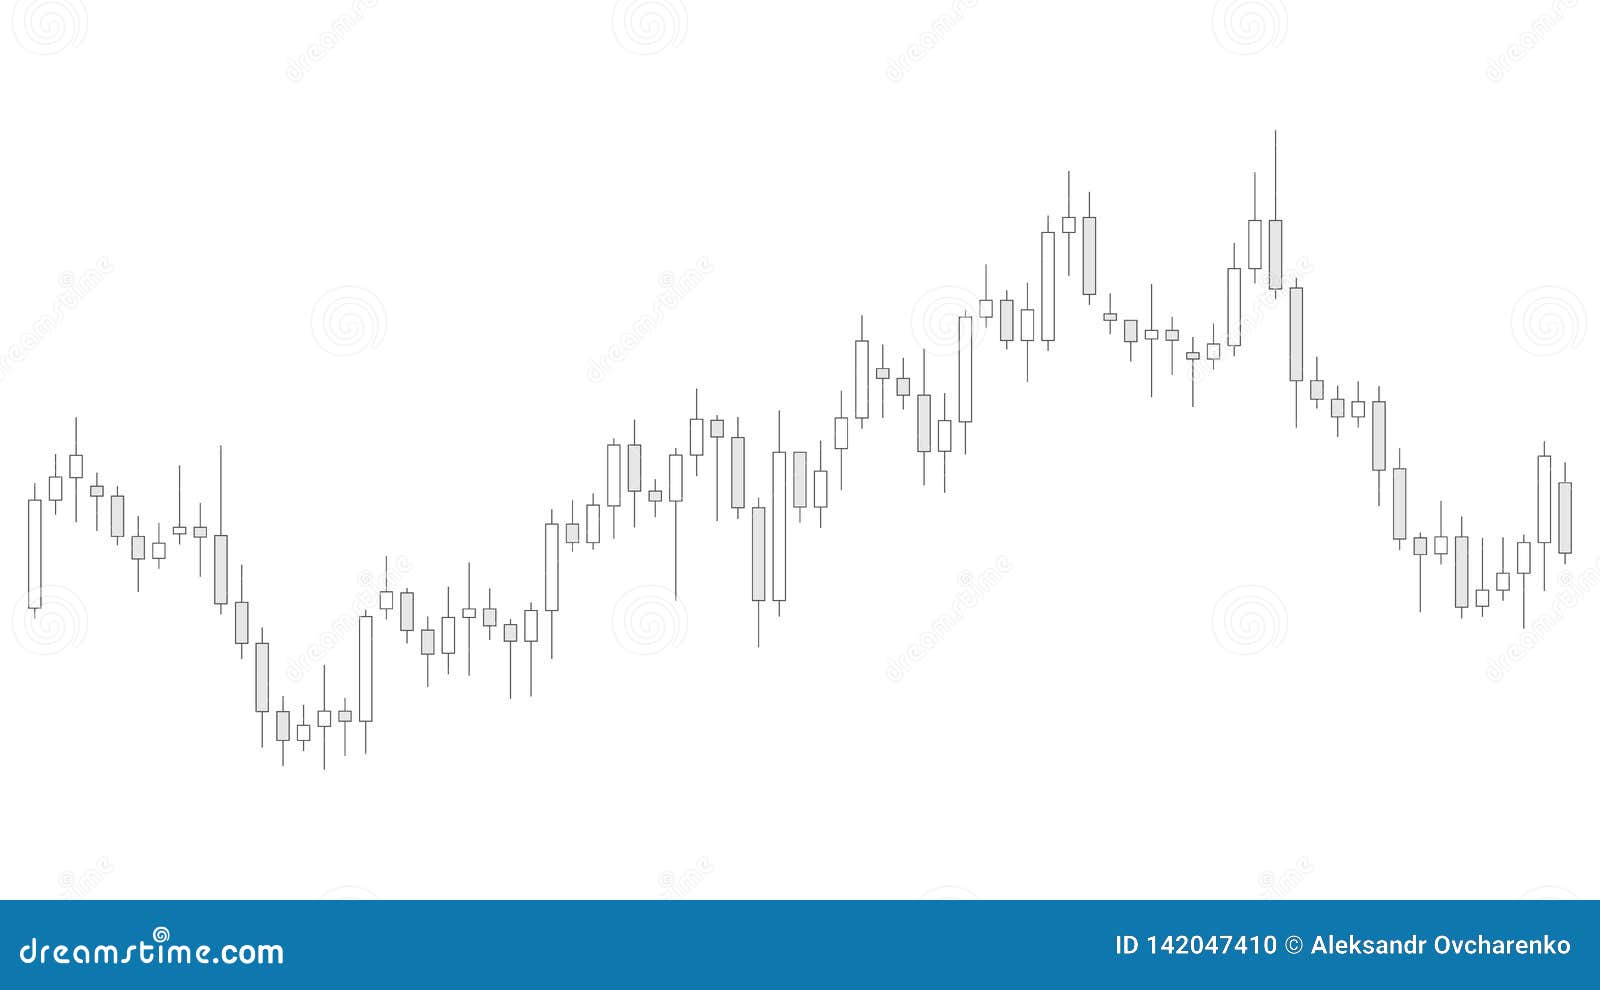 Grey Color Candlestick Chart In Financial Market Stock Vector - 